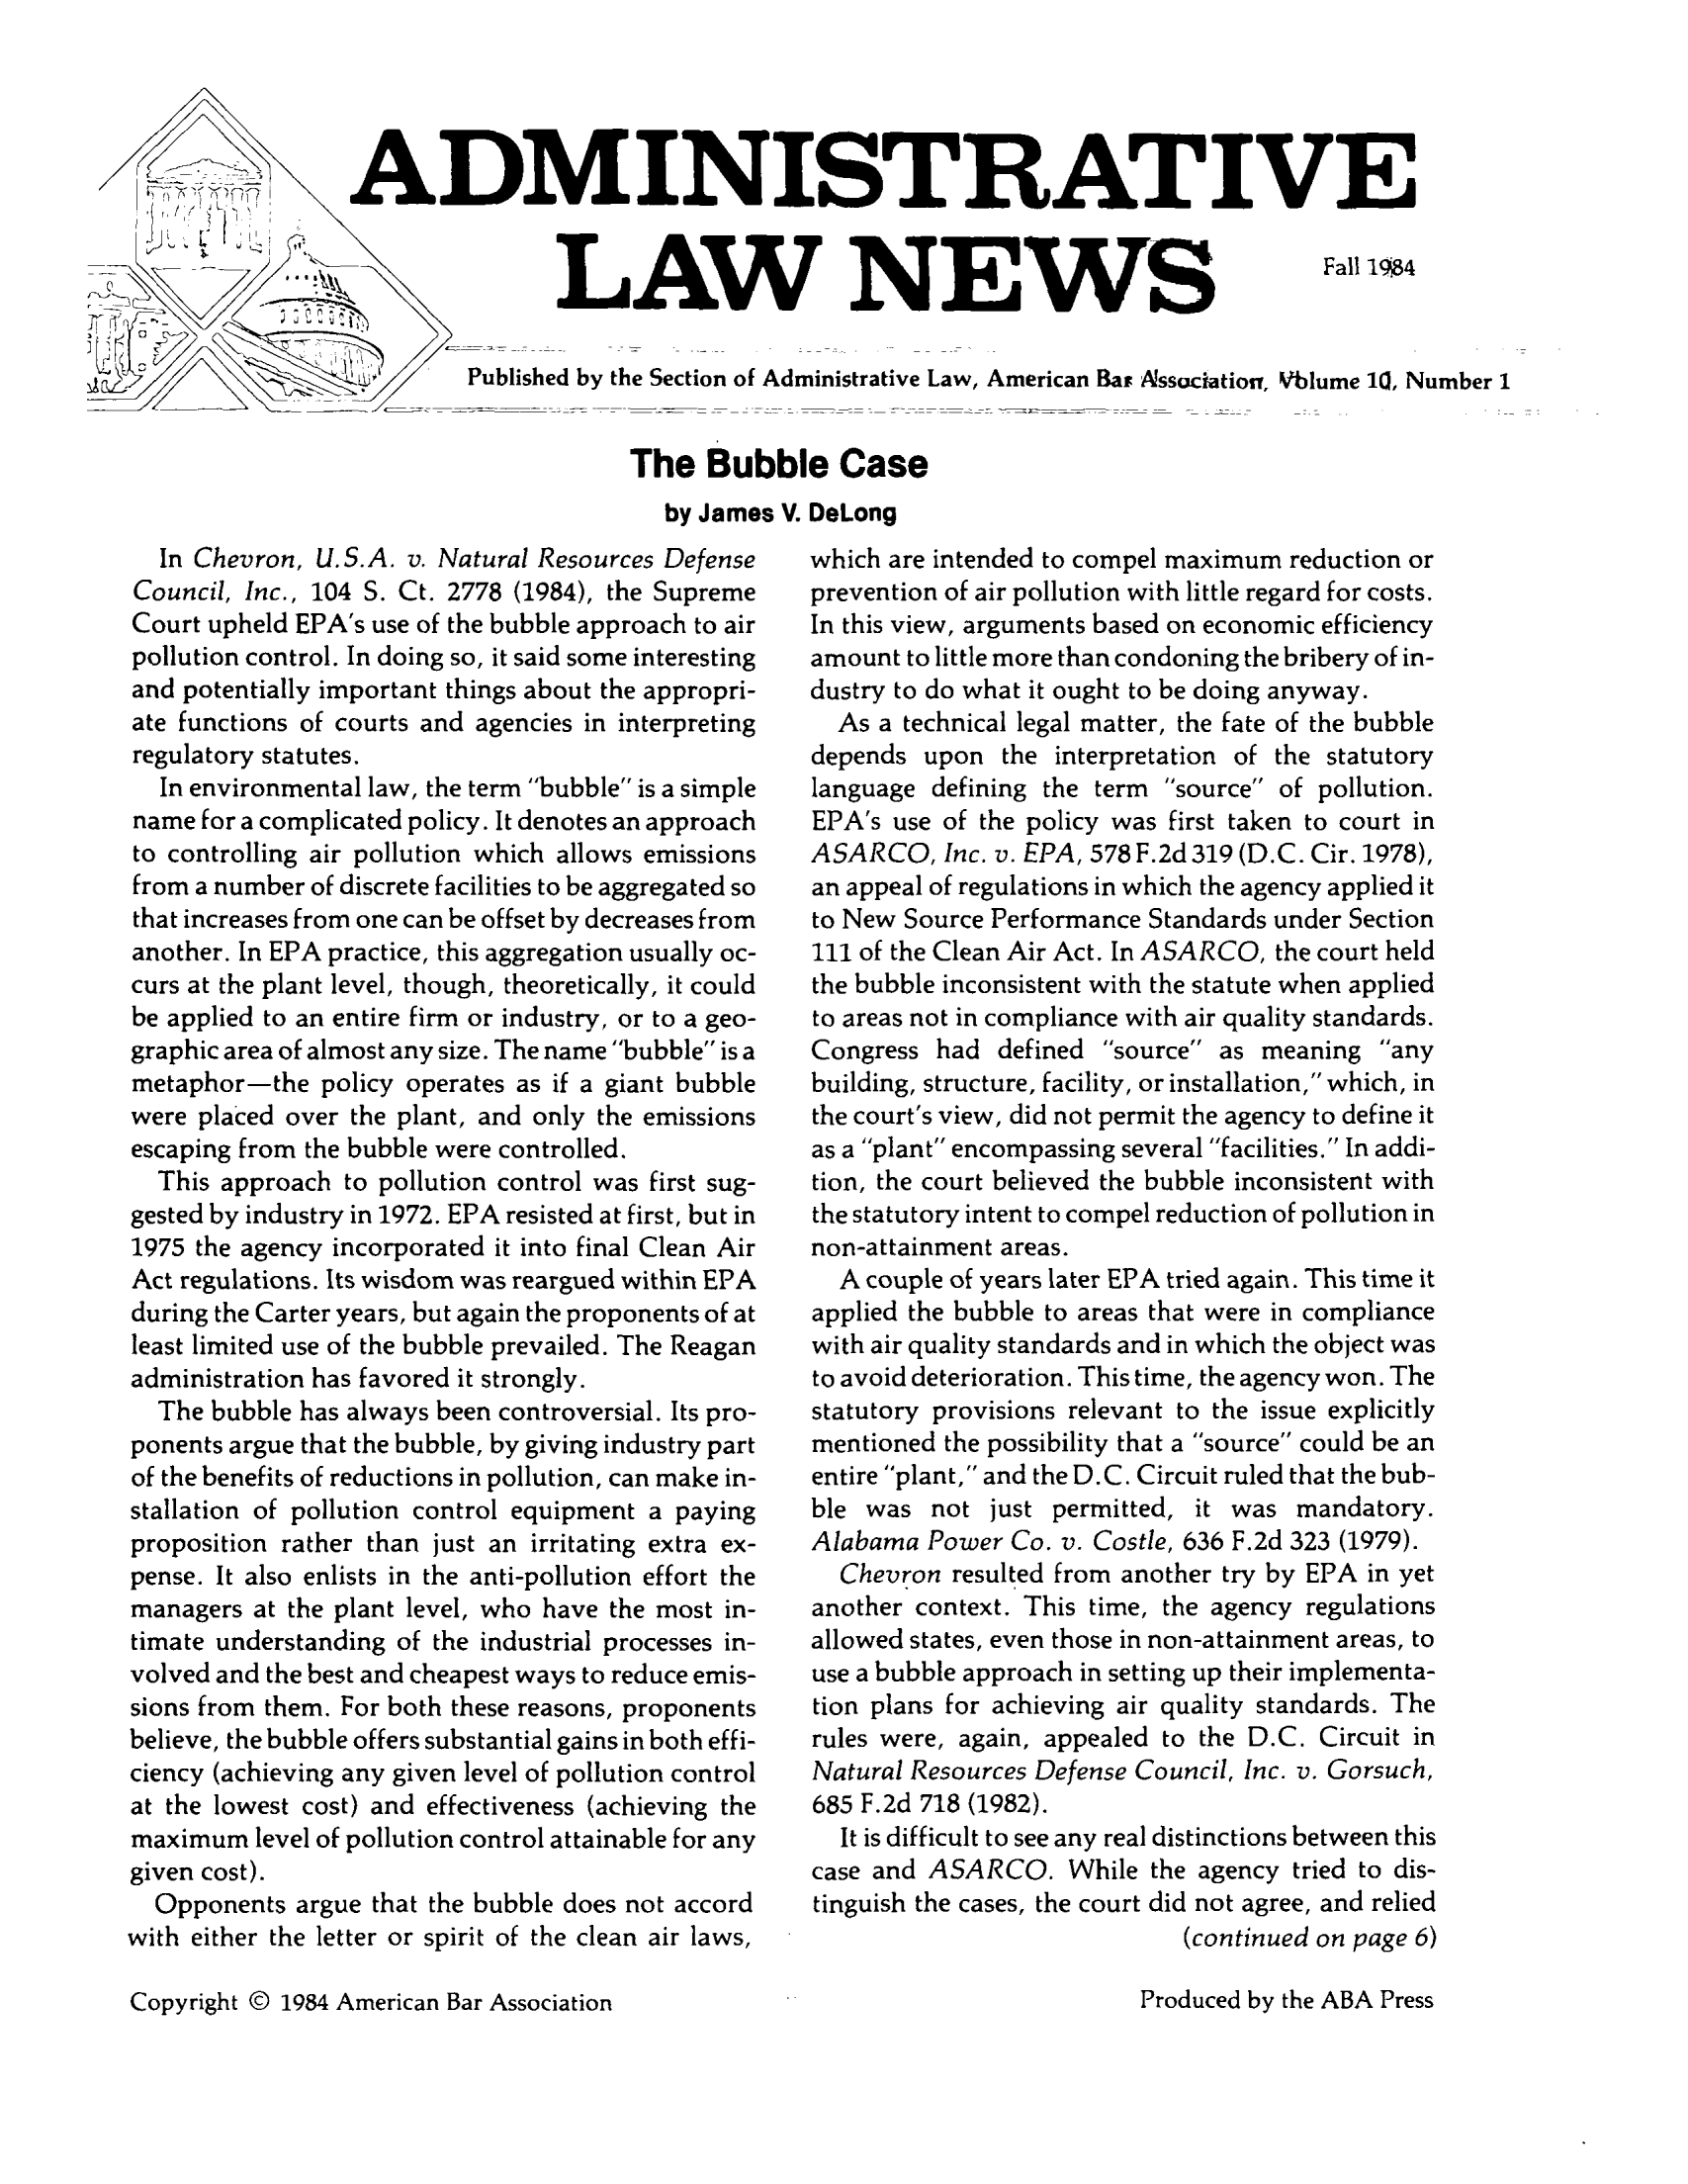 handle is hein.journals/admreln10 and id is 1 raw text is: ADMINISTRATIVE

LAW NEWS

Fall 1984

Published by the Section of Administrative Law, American Bar Associatior, Vblume l, Number 1
The Bubble Case
by James V. DeLong

In Chevron, U.S.A. v. Natural Resources Defense
Council, Inc., 104 S. Ct. 2778 (1984), the Supreme
Court upheld EPA's use of the bubble approach to air
pollution control. In doing so, it said some interesting
and potentially important things about the appropri-
ate functions of courts and agencies in interpreting
regulatory statutes.
In environmental law, the term bubble is a simple
name for a complicated policy. It denotes an approach
to controlling air pollution which allows emissions
from a number of discrete facilities to be aggregated so
that increases from one can be offset by decreases from
another. In EPA practice, this aggregation usually oc-
curs at the plant level, though, theoretically, it could
be applied to an entire firm or industry, or to a geo-
graphic area of almost any size. The name bubble is a
metaphor-the policy operates as if a giant bubble
were placed over the plant, and only the emissions
escaping from the bubble were controlled.
This approach to pollution control was first sug-
gested by industry in 1972. EPA resisted at first, but in
1975 the agency incorporated it into final Clean Air
Act regulations. Its wisdom was reargued within EPA
during the Carter years, but again the proponents of at
least limited use of the bubble prevailed. The Reagan
administration has favored it strongly.
The bubble has always been controversial. Its pro-
ponents argue that the bubble, by giving industry part
of the benefits of reductions in pollution, can make in-
stallation of pollution control equipment a paying
proposition rather than just an irritating extra ex-
pense. It also enlists in the anti-pollution effort the
managers at the plant level, who have the most in-
timate understanding of the industrial processes in-
volved and the best and cheapest ways to reduce emis-
sions from them. For both these reasons, proponents
believe, the bubble offers substantial gains in both effi-
ciency (achieving any given level of pollution control
at the lowest cost) and effectiveness (achieving the
maximum level of pollution control attainable for any
given cost).
Opponents argue that the bubble does not accord
with either the letter or spirit of the clean air laws,

which are intended to compel maximum reduction or
prevention of air pollution with little regard for costs.
In this view, arguments based on economic efficiency
amount to little more than condoning the bribery of in-
dustry to do what it ought to be doing anyway.
As a technical legal matter, the fate of the bubble
depends upon the interpretation of the statutory
language defining the term source of pollution.
EPA's use of the policy was first taken to court in
ASARCO, Inc. v. EPA, 578 F.2d 319 (D.C. Cir. 1978),
an appeal of regulations in which the agency applied it
to New Source Performance Standards under Section
111 of the Clean Air Act. In ASARCO, the court held
the bubble inconsistent with the statute when applied
to areas not in compliance with air quality standards.
Congress had defined source as meaning any
building, structure, facility, or installation, which, in
the court's view, did not permit the agency to define it
as a plant encompassing several facilities. In addi-
tion, the court believed the bubble inconsistent with
the statutory intent to compel reduction of pollution in
non-attainment areas.
A couple of years later EPA tried again. This time it
applied the bubble to areas that were in compliance
with air quality standards and in which the object was
to avoid deterioration. This time, the agency won. The
statutory provisions relevant to the issue explicitly
mentioned the possibility that a source could be an
entire plant, and the D.C. Circuit ruled that the bub-
ble was not just permitted, it was mandatory.
Alabama Power Co. v. Costle, 636 F.2d 323 (1979).
Chevron resulted from another try by EPA in yet
another context. This time, the agency regulations
allowed states, even those in non-attainment areas, to
use a bubble approach in setting up their implementa-
tion plans for achieving air quality standards. The
rules were, again, appealed to the D.C. Circuit in
Natural Resources Defense Council, Inc. v. Gorsuch,
685 F.2d 718 (1982).
It is difficult to see any real distinctions between this
case and ASARCO. While the agency tried to dis-
tinguish the cases, the court did not agree, and relied
(continued on page 6)

Copyright © 1984 American Bar Association

Produced by the ABA Press


